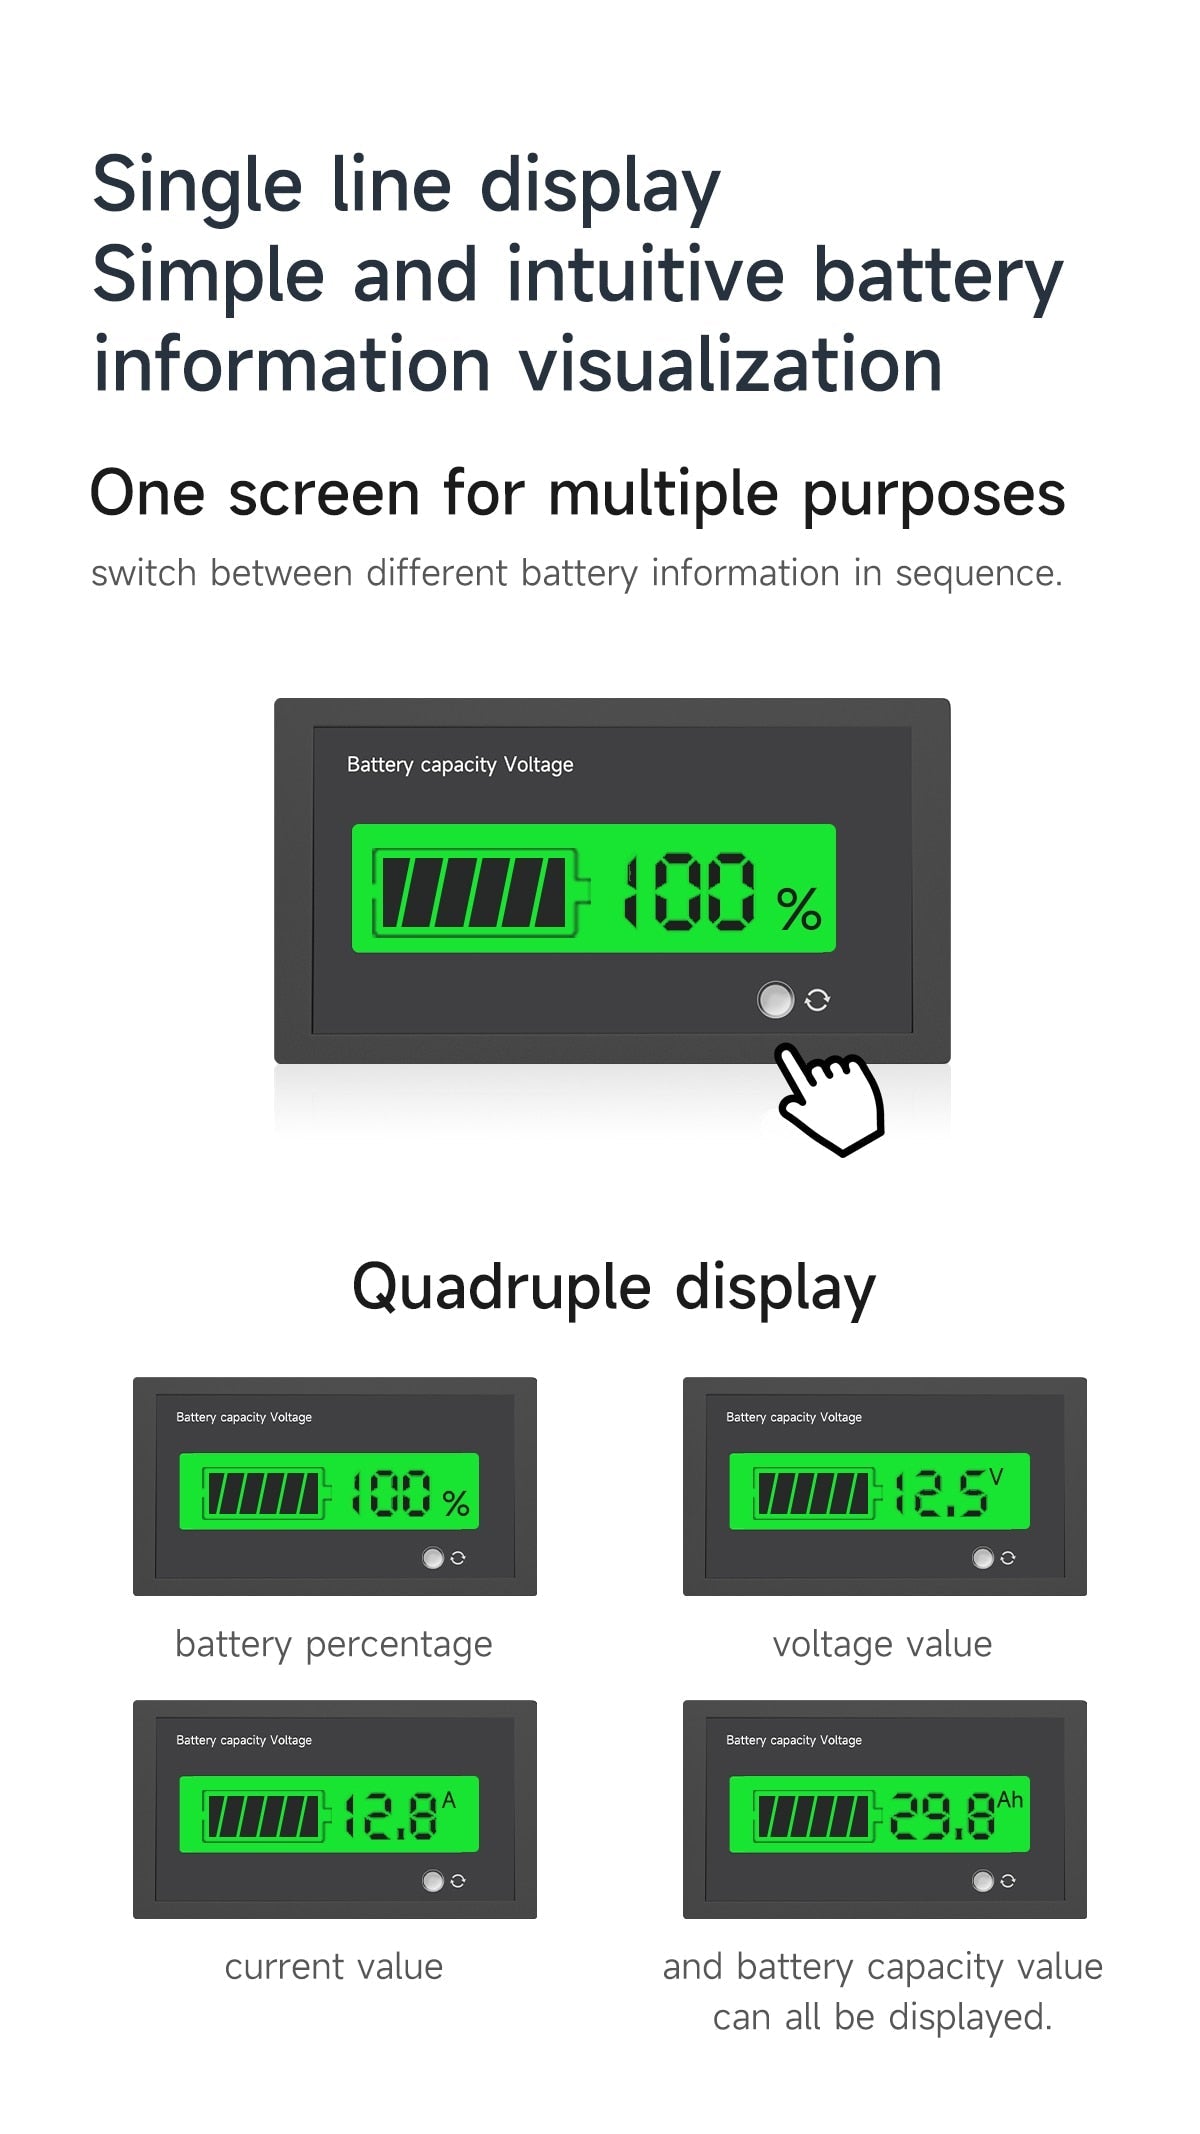 Daly Smart BMS lifepo4 Li-ion Accessories 3s-24s 30A-500A 4s 8s 16s Touch Control Screen LCD Display And CAN BUS AND LIGHT BOARD  Electronics > Electronics Accessories > Power > Battery Accessories 43.29 EZYSELLA SHOP